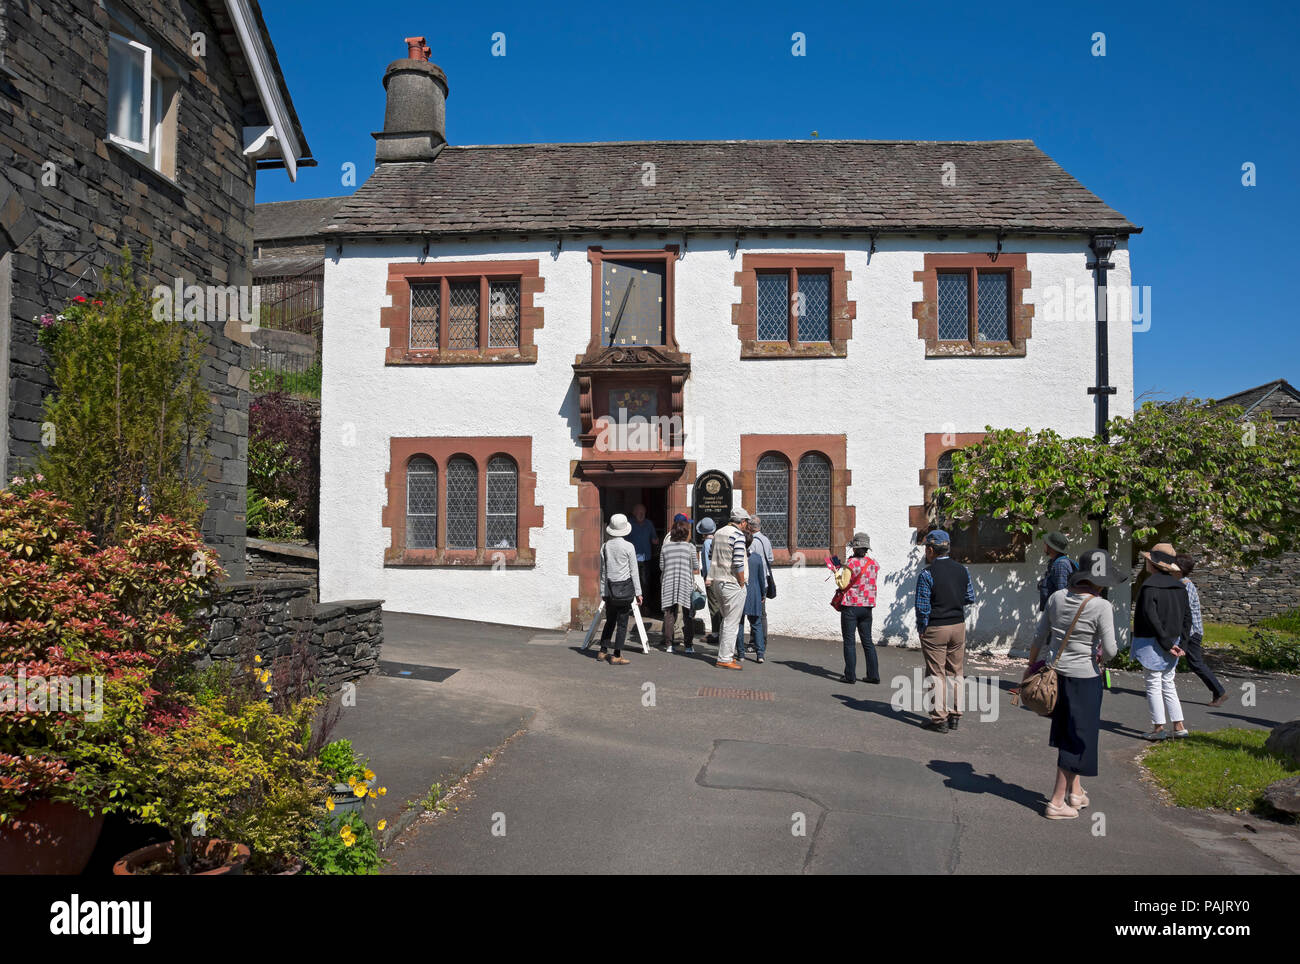 People tourists visitors outside The Old Grammar School Museum (formerly attended by William Wordsworth) Hawkshead Cumbria England UK Britain Stock Photo